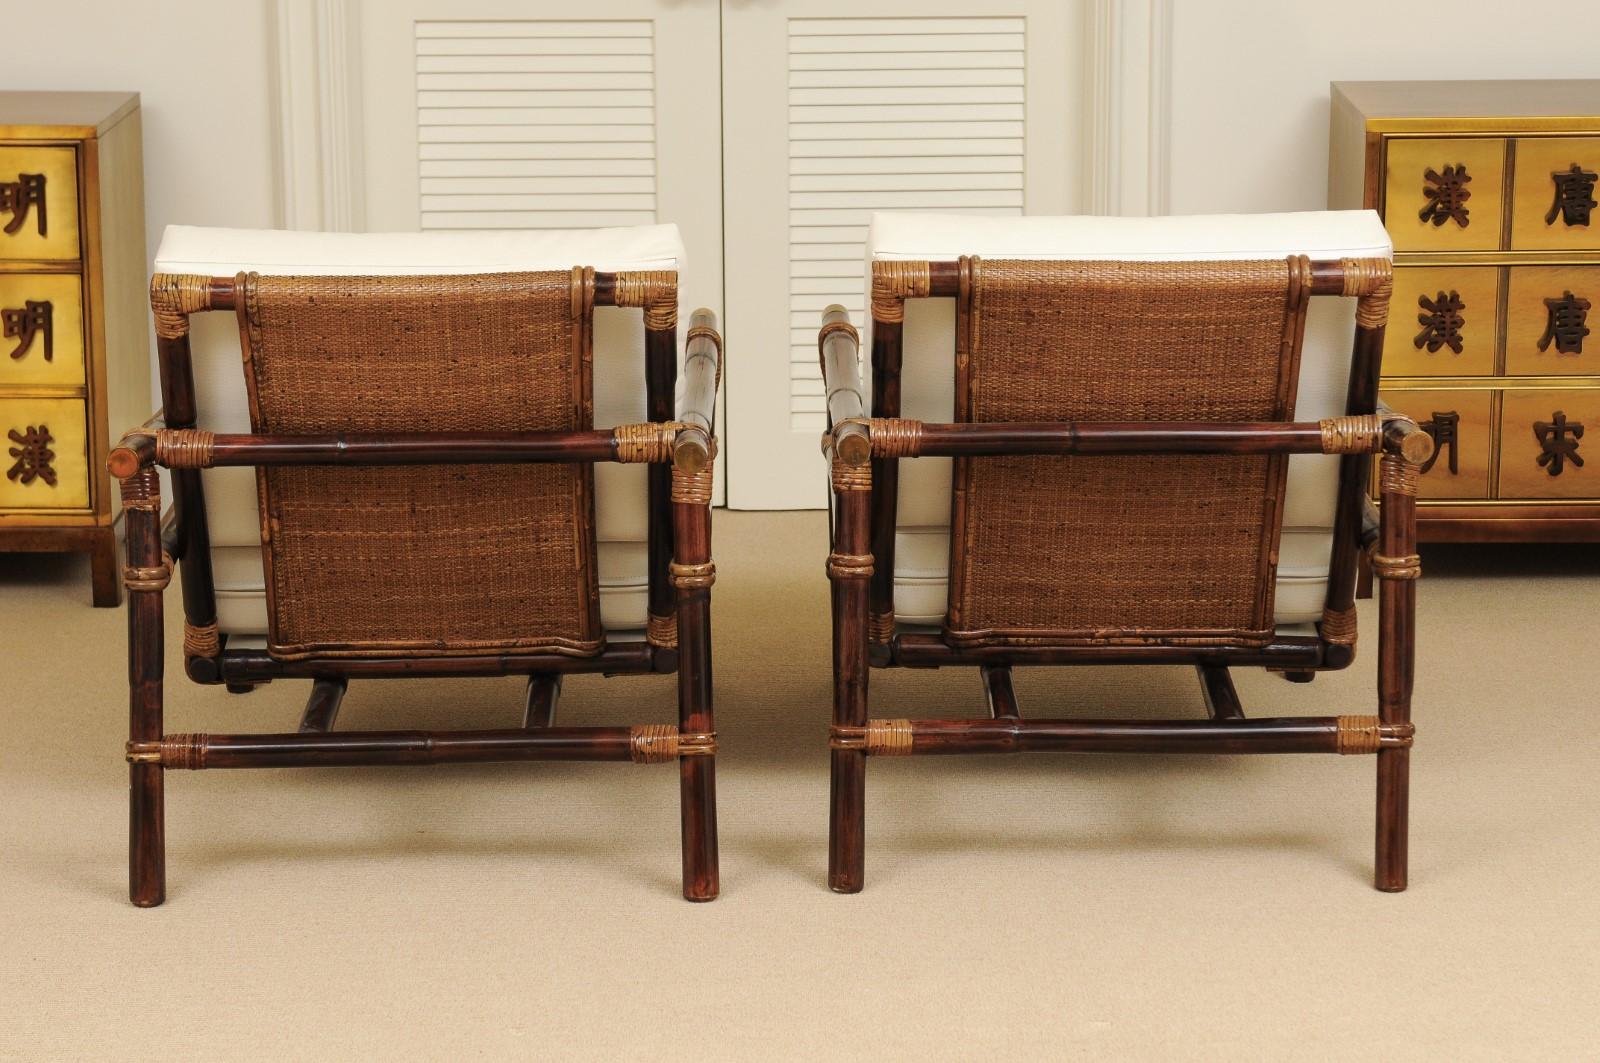 Superb Restored Pair of Campaign Loungers by Wisner for Ficks Reed, circa 1954 3